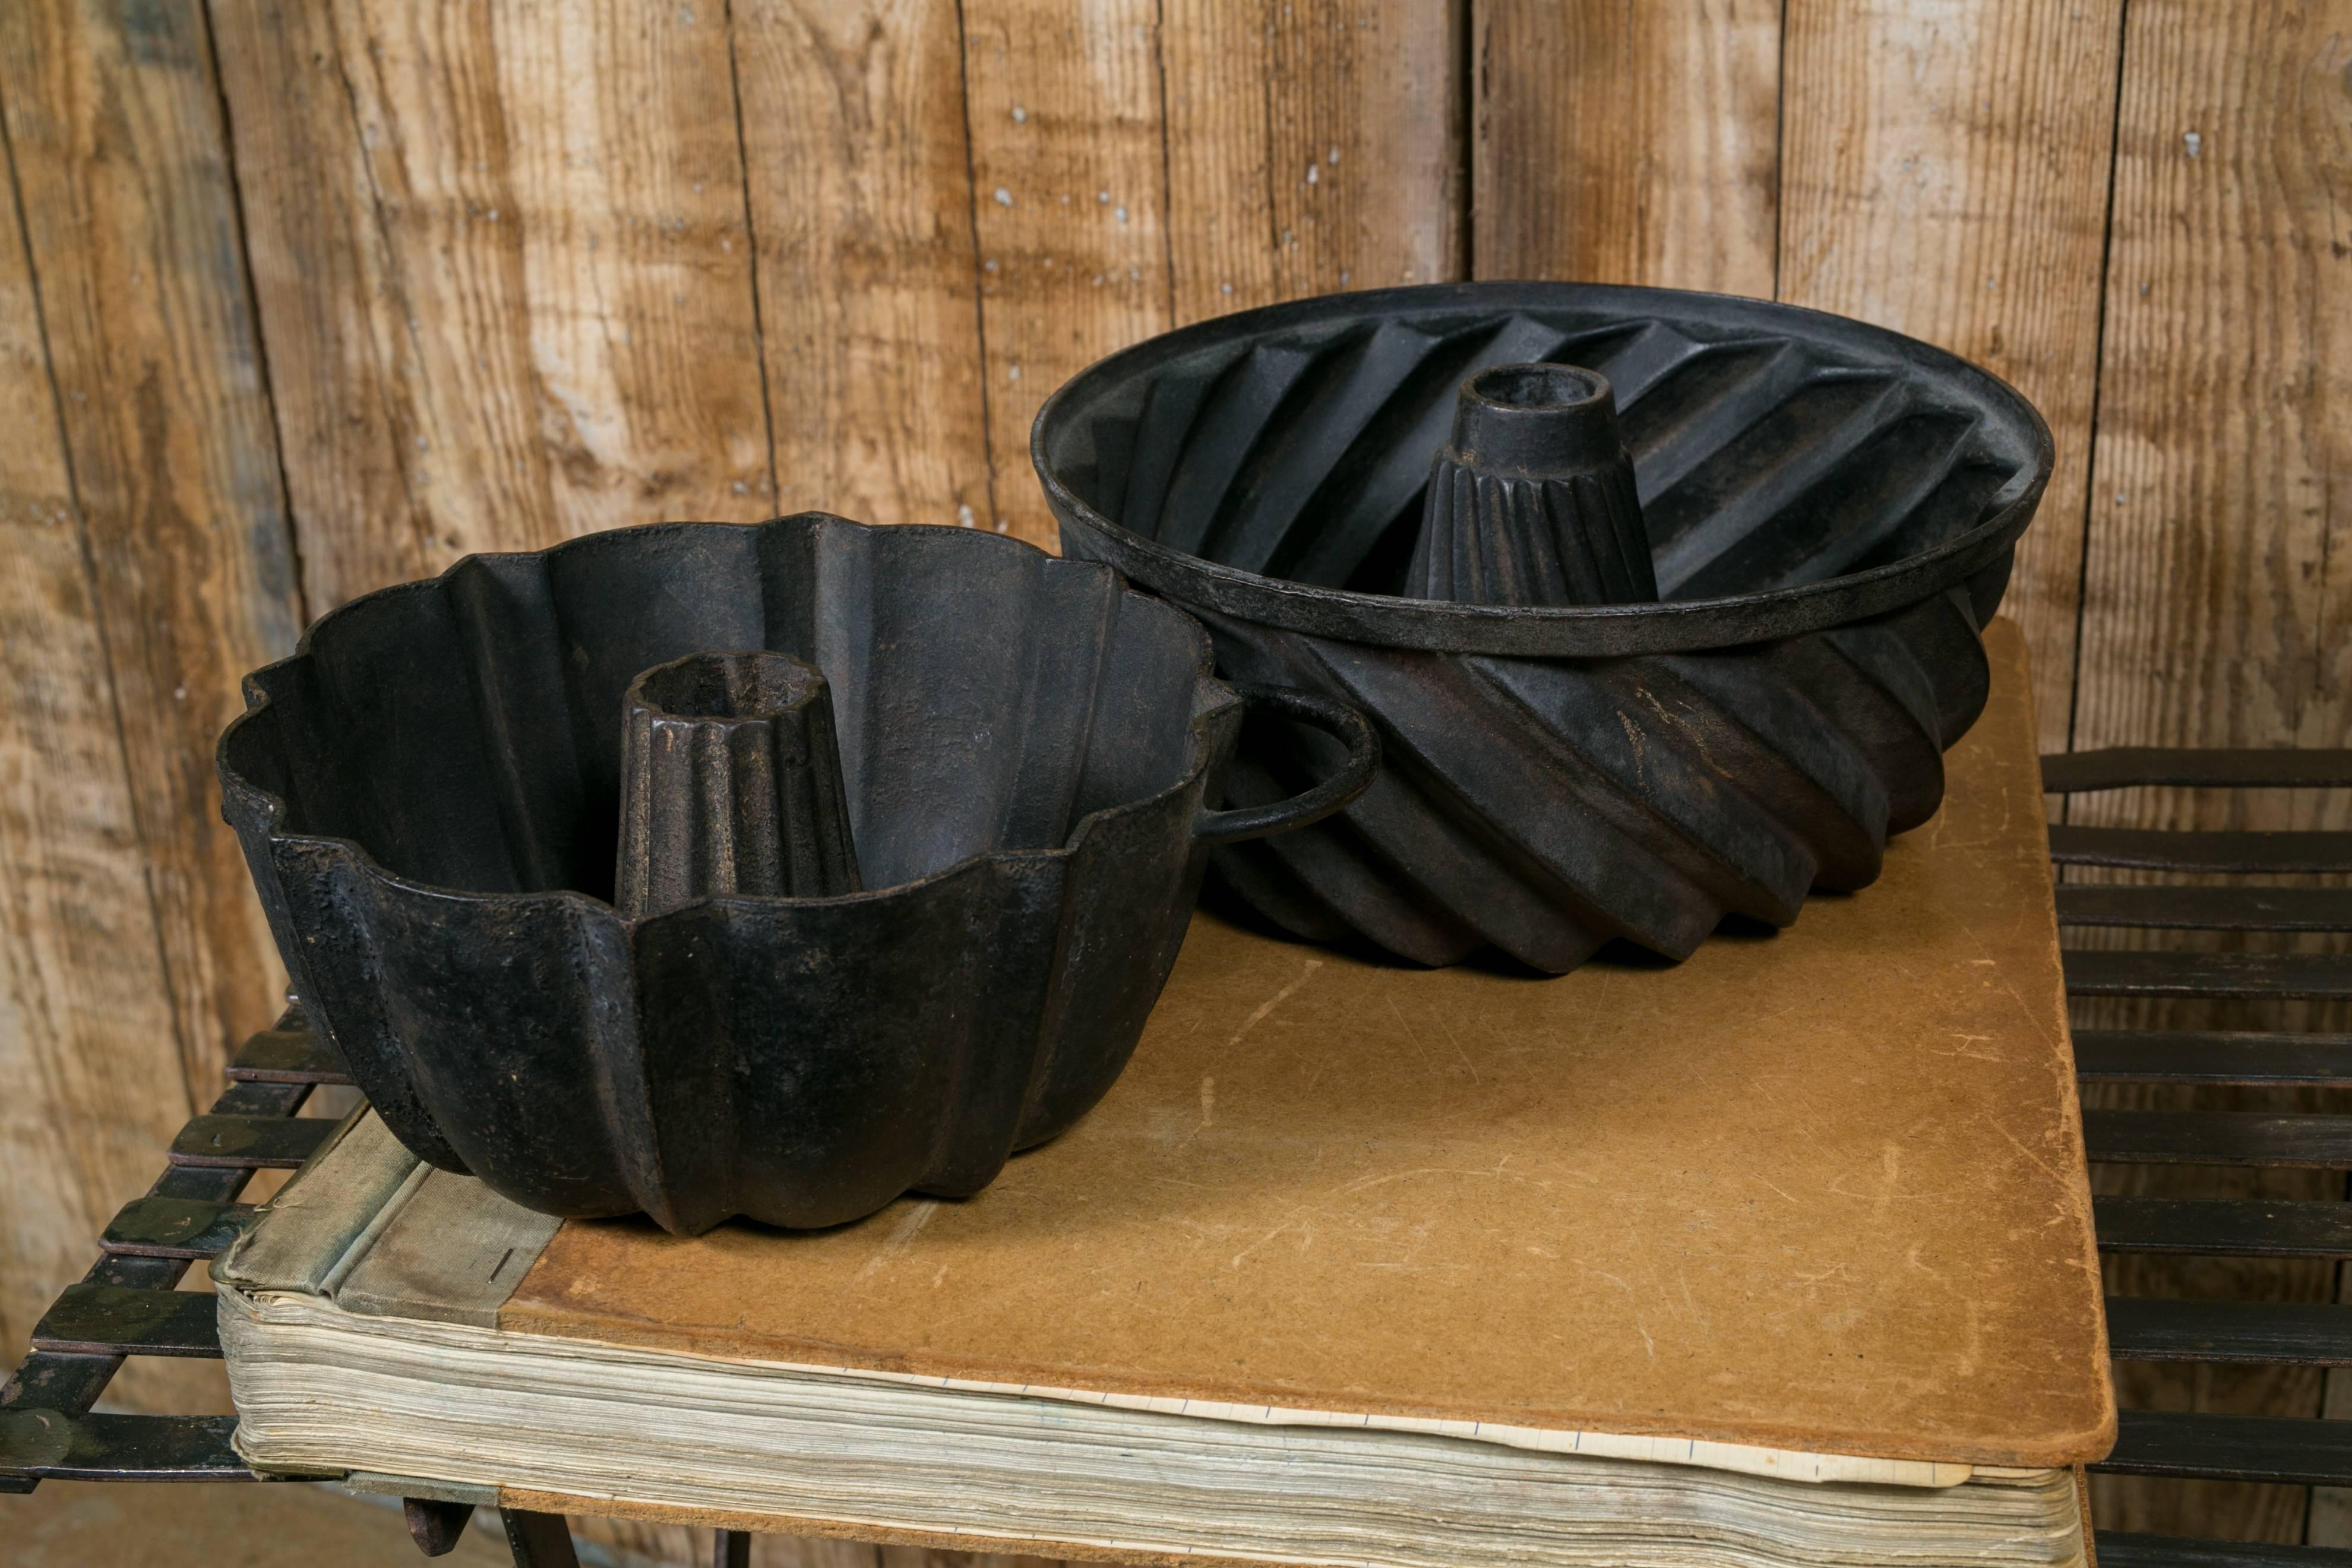 Two antique cast iron traditional Kugelhopf cake pan molds from the Netherlands, circa 1900. One features diagonal ridges and the other vertical. Pan on bottom left has a handle on one side. Price is for two molds. Measurement listed is for mold